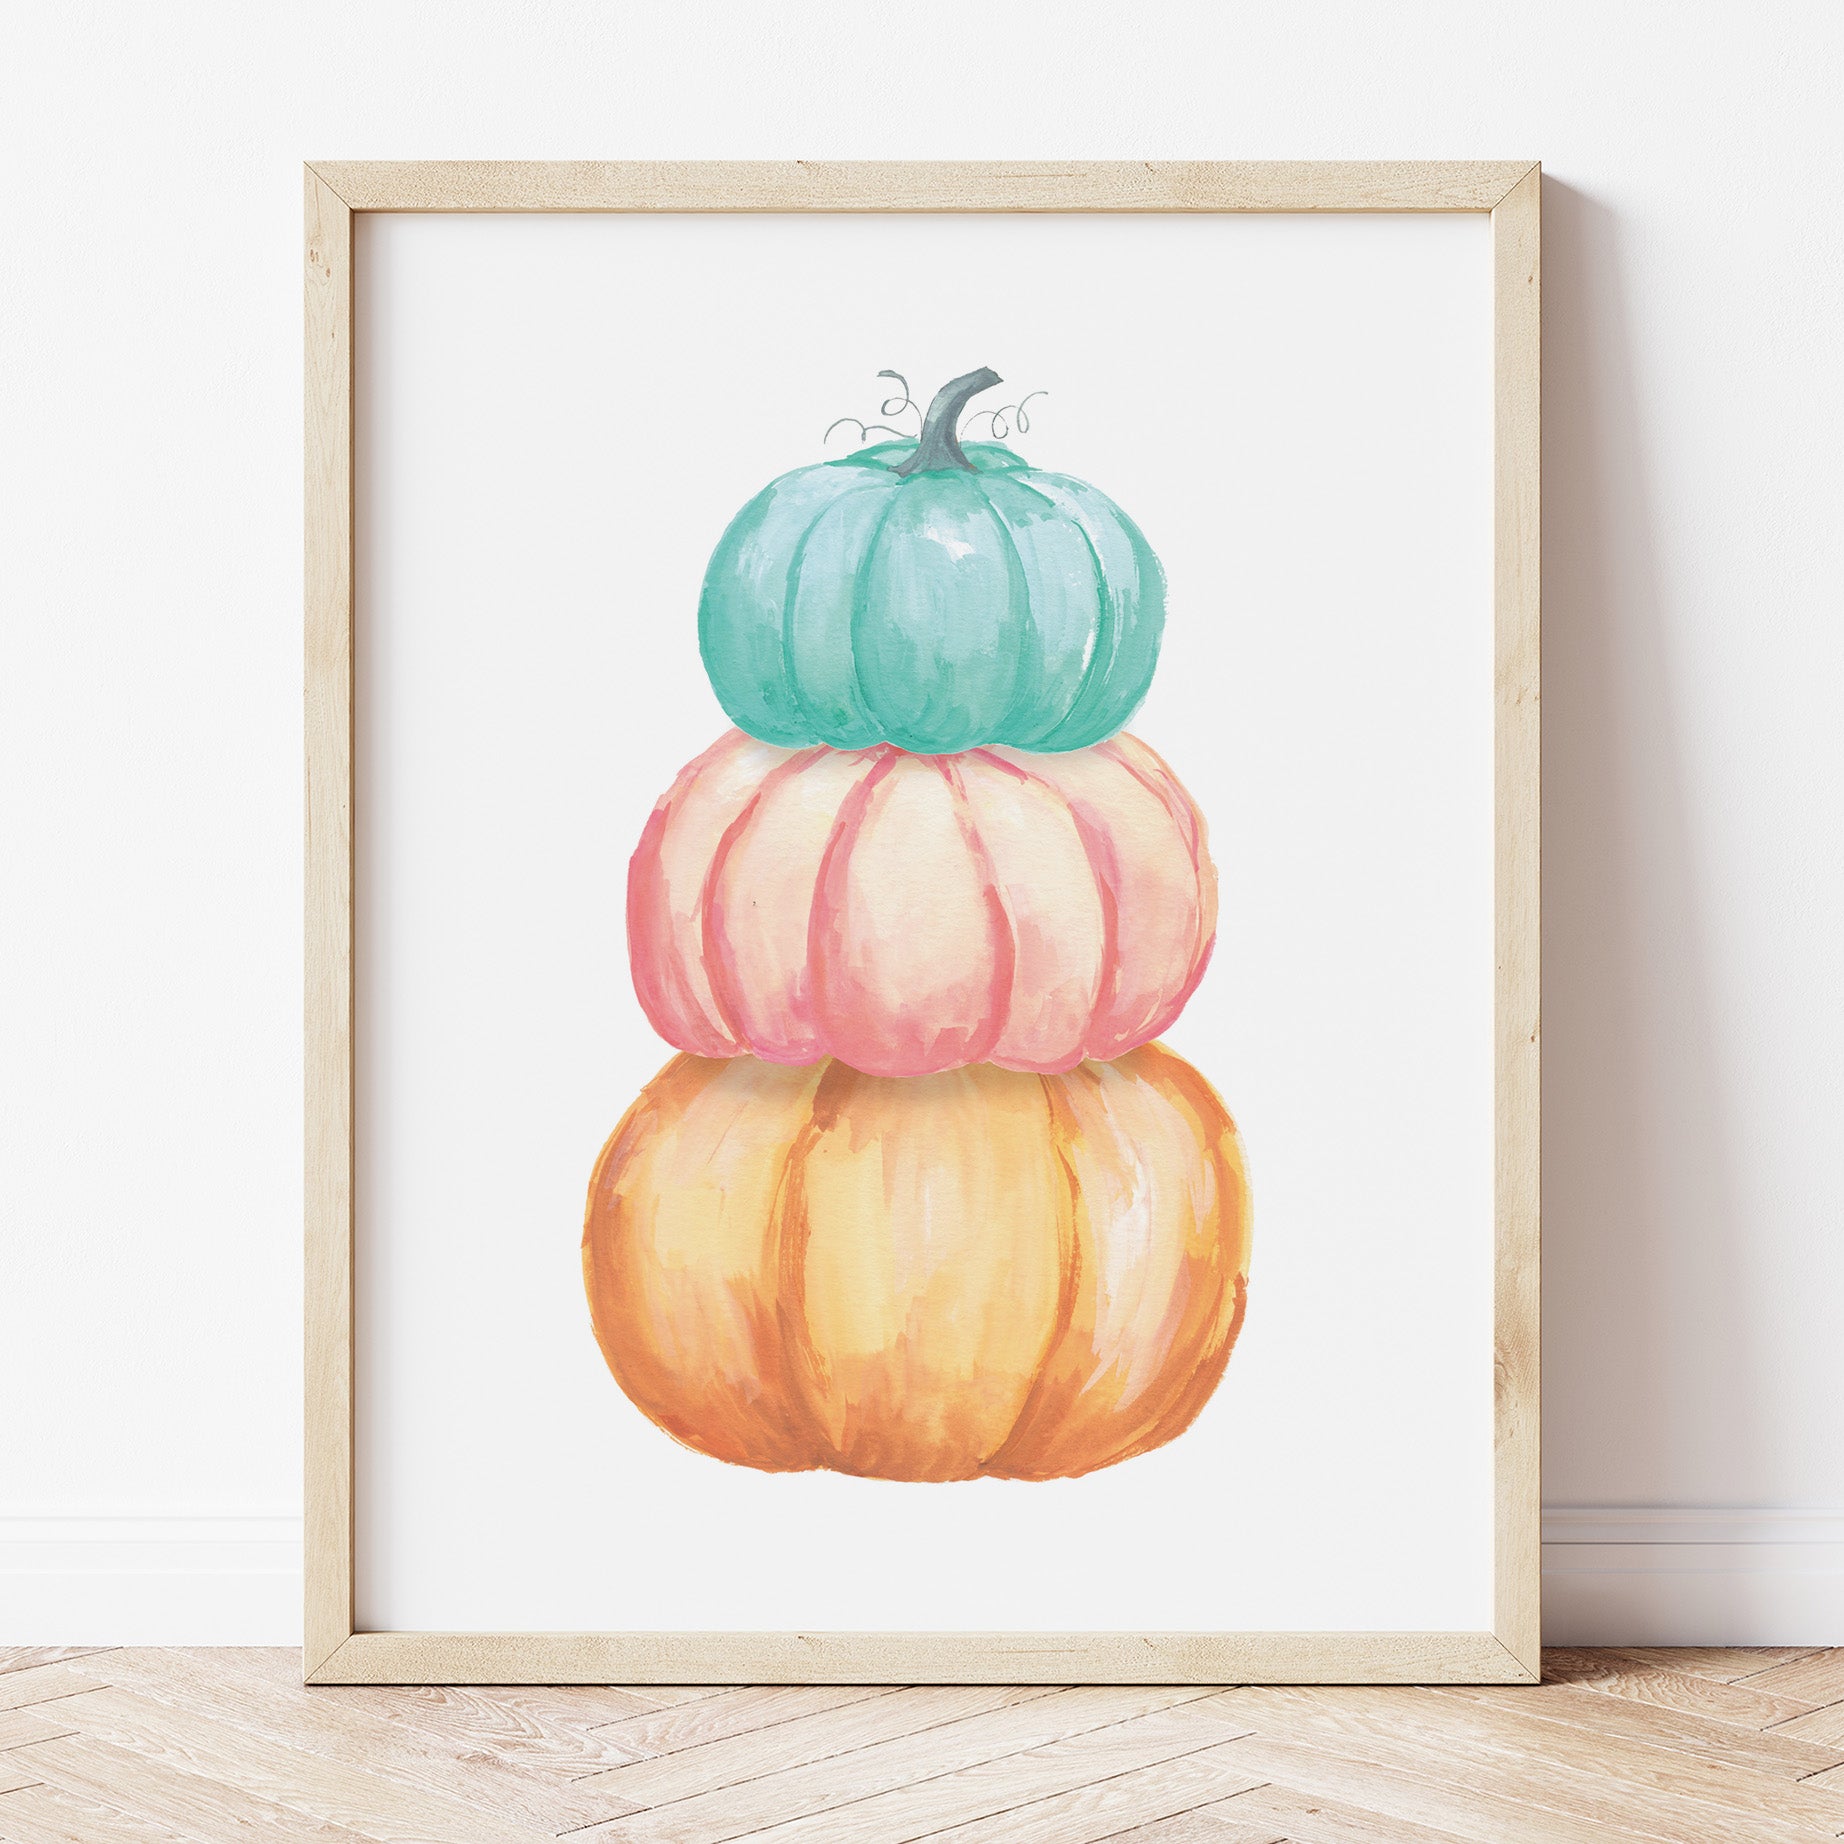 Painting of Stacked Pumpkins in Orange, Pink, and Teal. The paint texture gives it Rustic, elegant vibe!